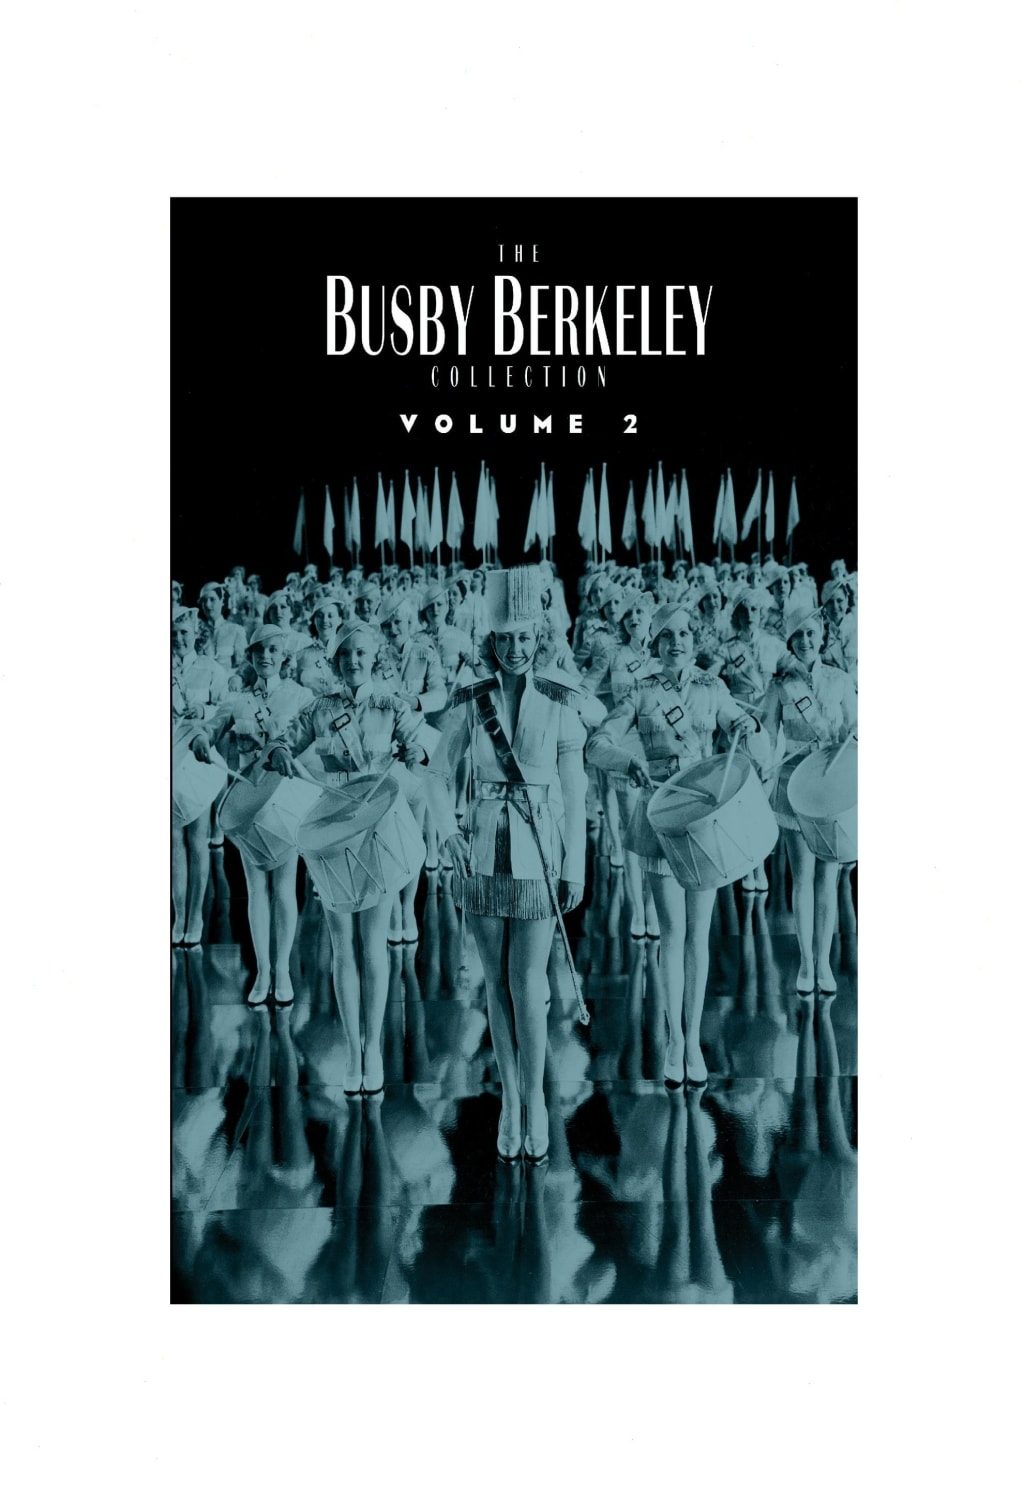 Busby Berkeley Collection Volume 2 (DVD)